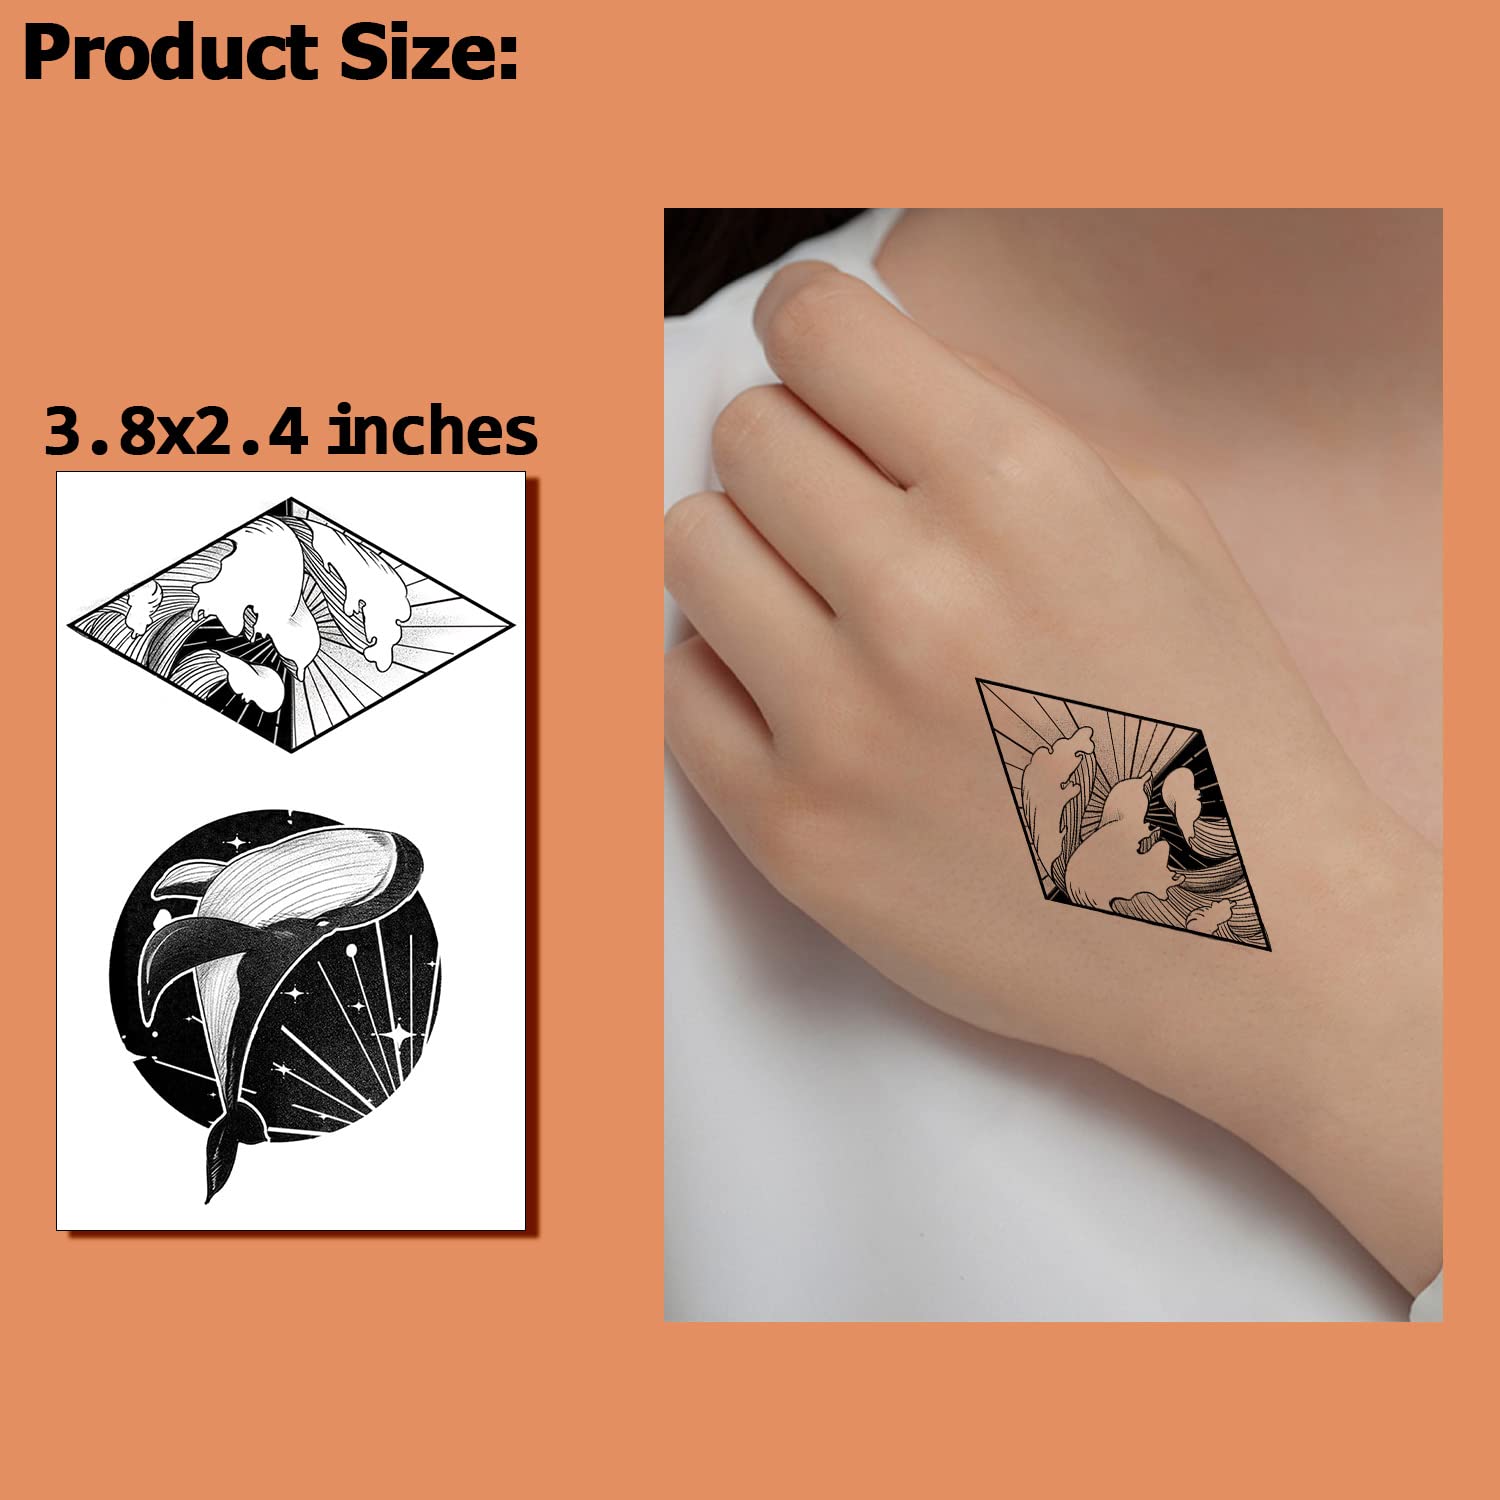 Cerlaza Temporary Tattoos for Men Women, 30 Sheets Small Hand Fake Tattoos for Adult Body Art, Waterproof Tattoo Stickers Space Moon Design on Neck Clavicle Shoulder